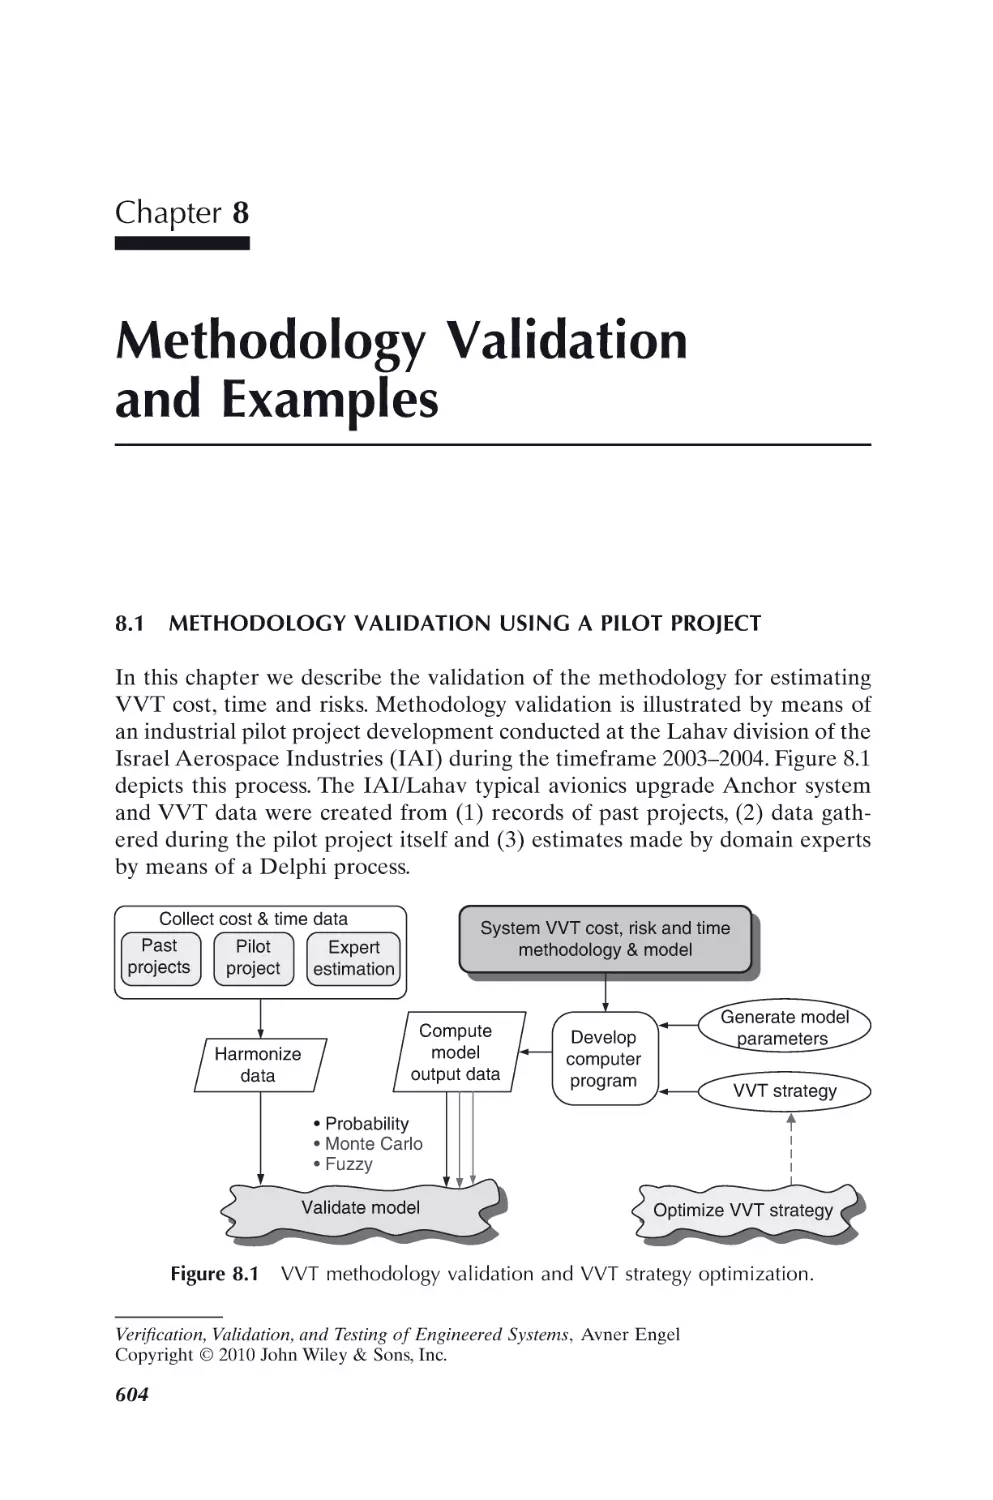 Chapter 8
8.1 METHODOLOGY VALIDATION USING A PILOT PROJECT